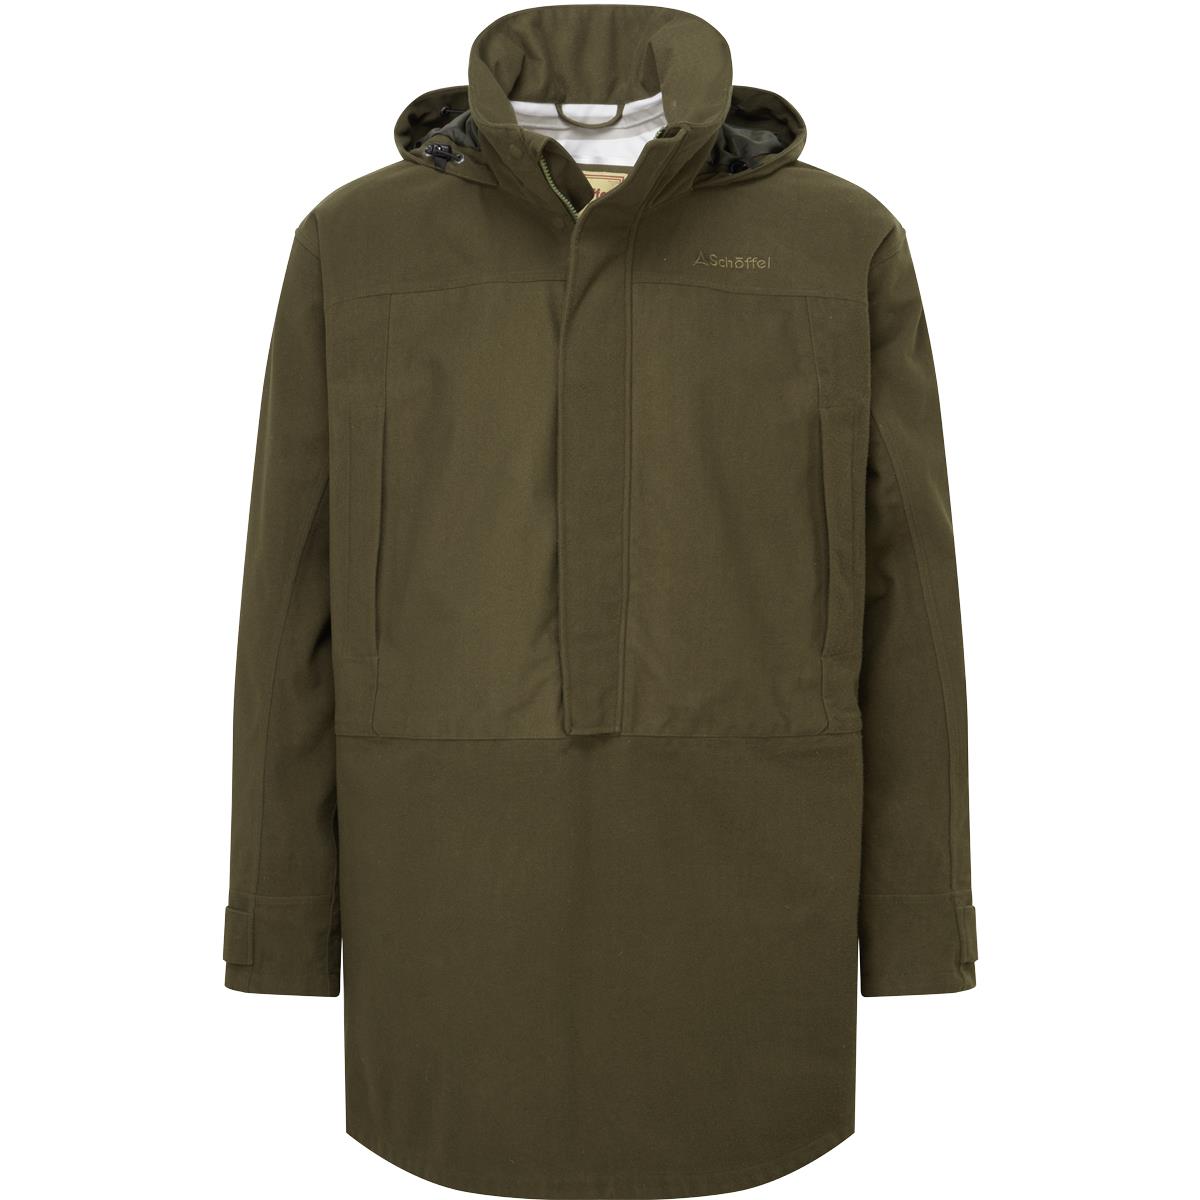 For the Schoffel smock, should I order a UK size or a Euro size?